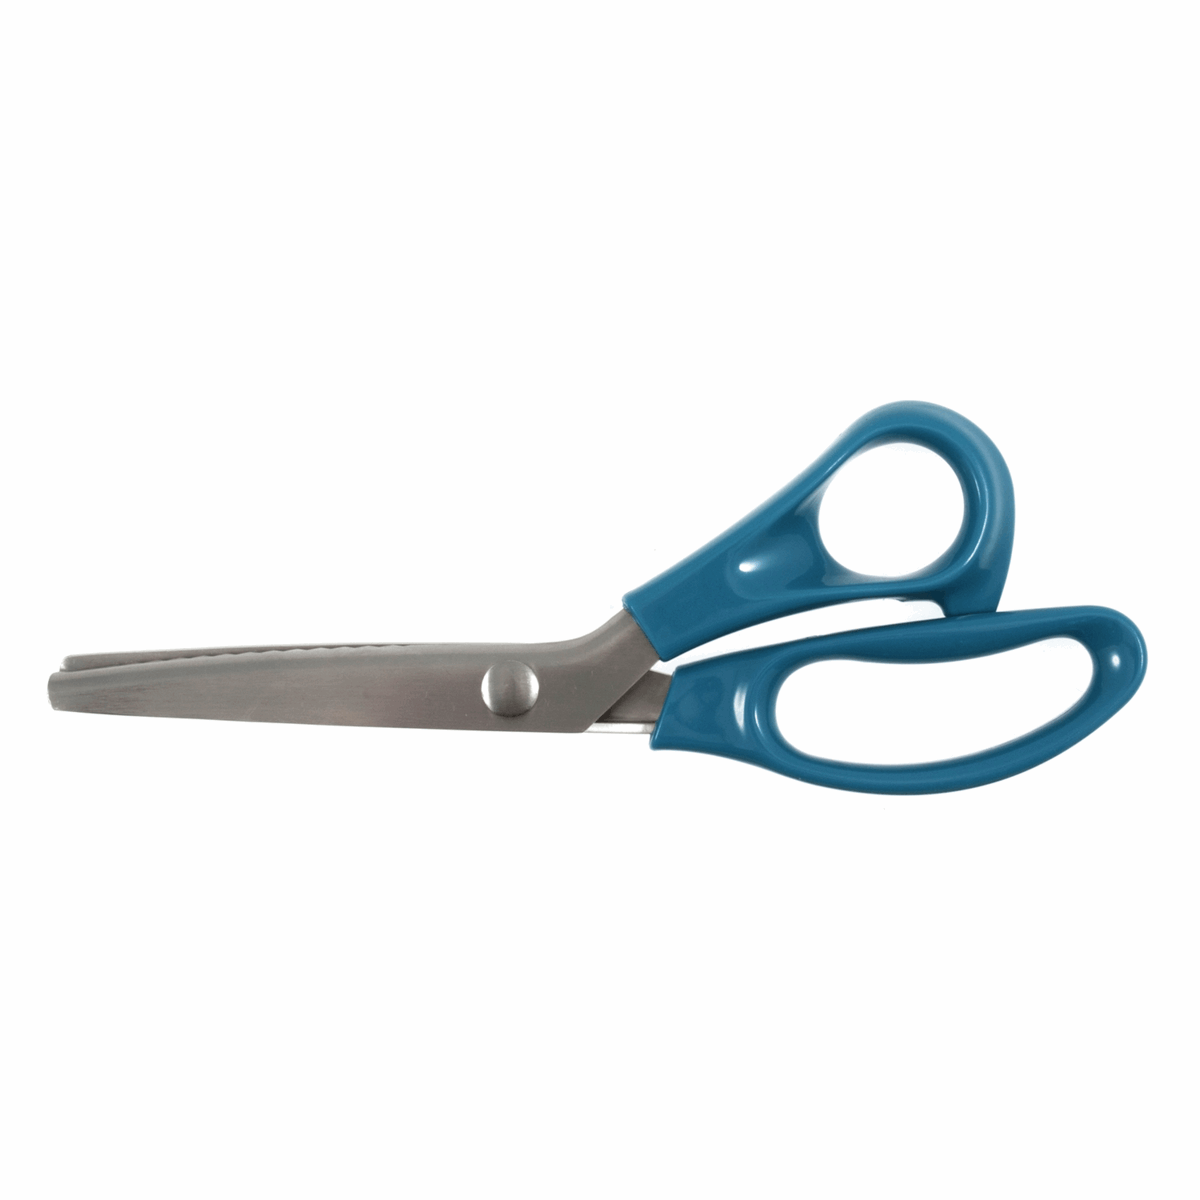 Trimits Pinking shears 23cm/9in